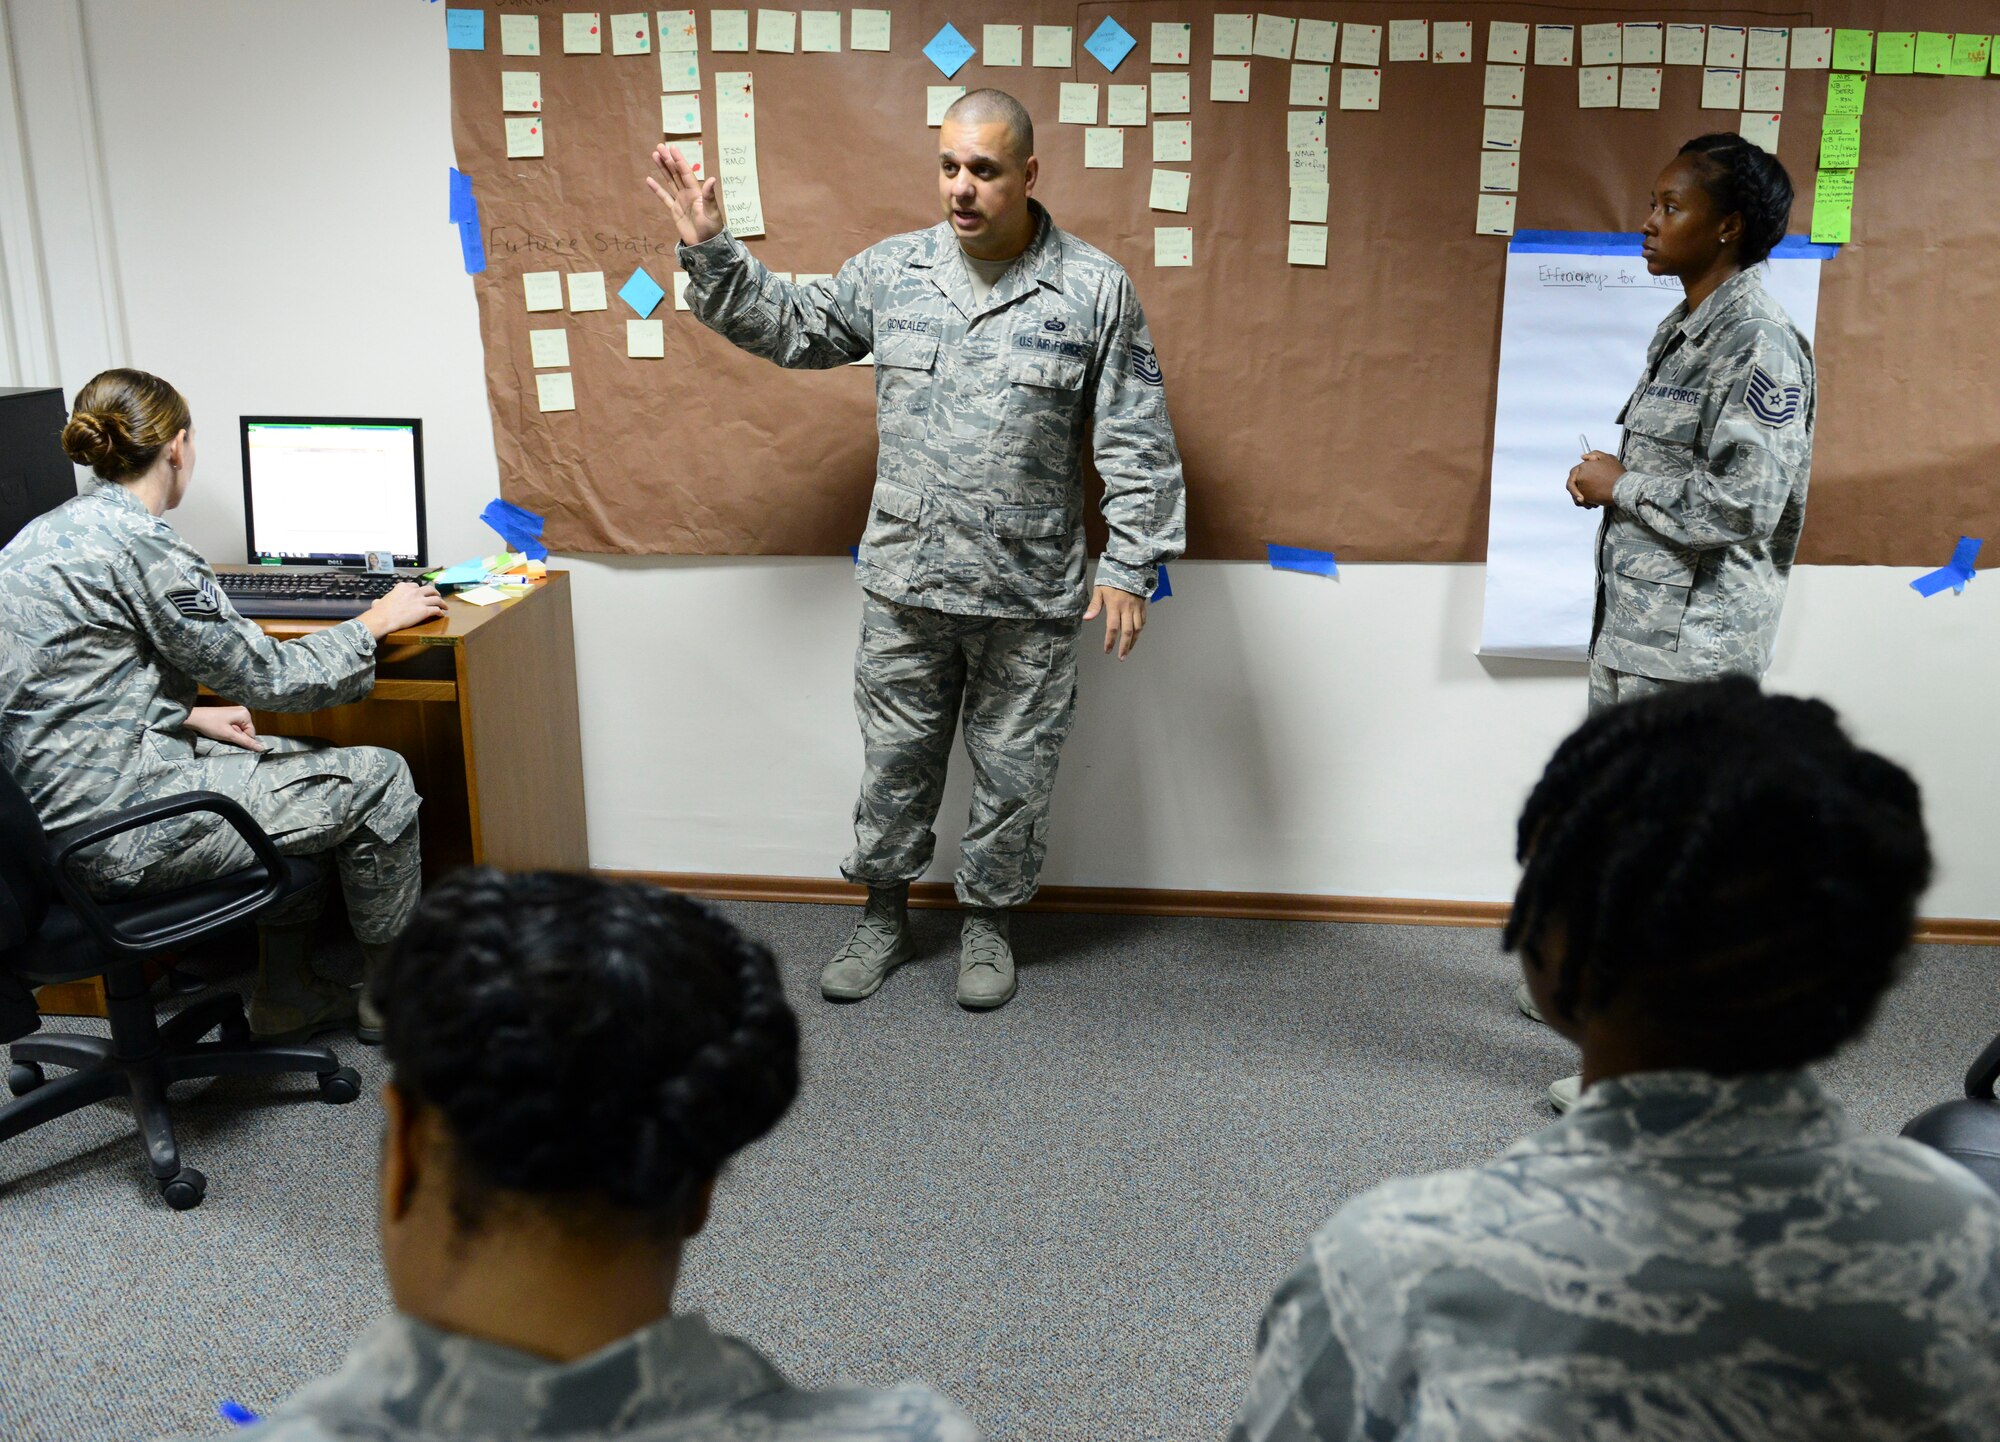 Tech. Sgt. Max Gonzales, 39th Force Support Squadron manpower analyst, facilitates an Air Force Smart Operations of the 21st century event on the stork nesting program Oct. 23, 2014, Incirlik Air Base, Turkey. Gonzales guides the process through the appropriate stages. (U.S. Air Force photo by Staff Sgt. Eboni Reams/Released)